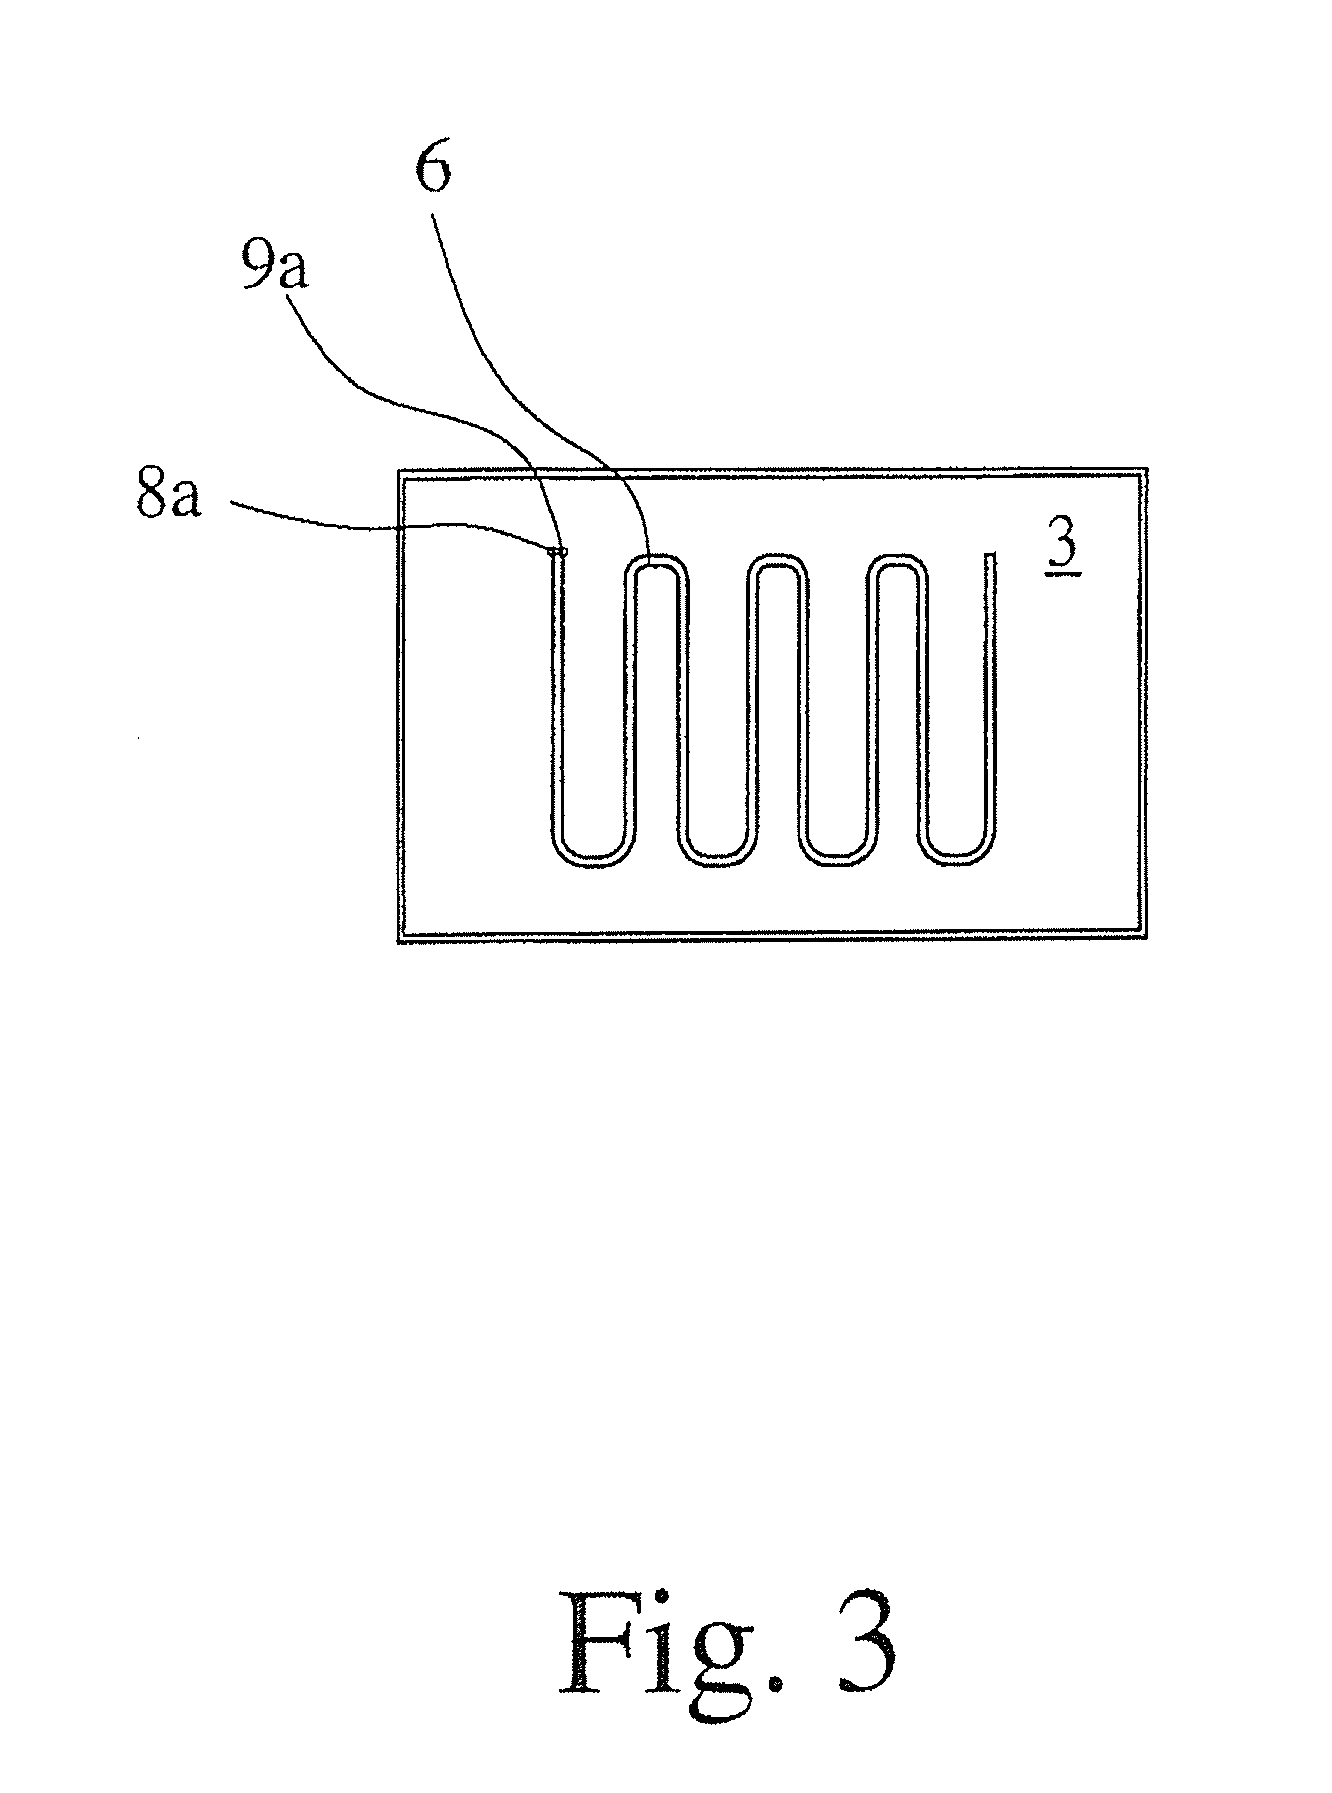 Fill level switch and sensor element for a fill level switch